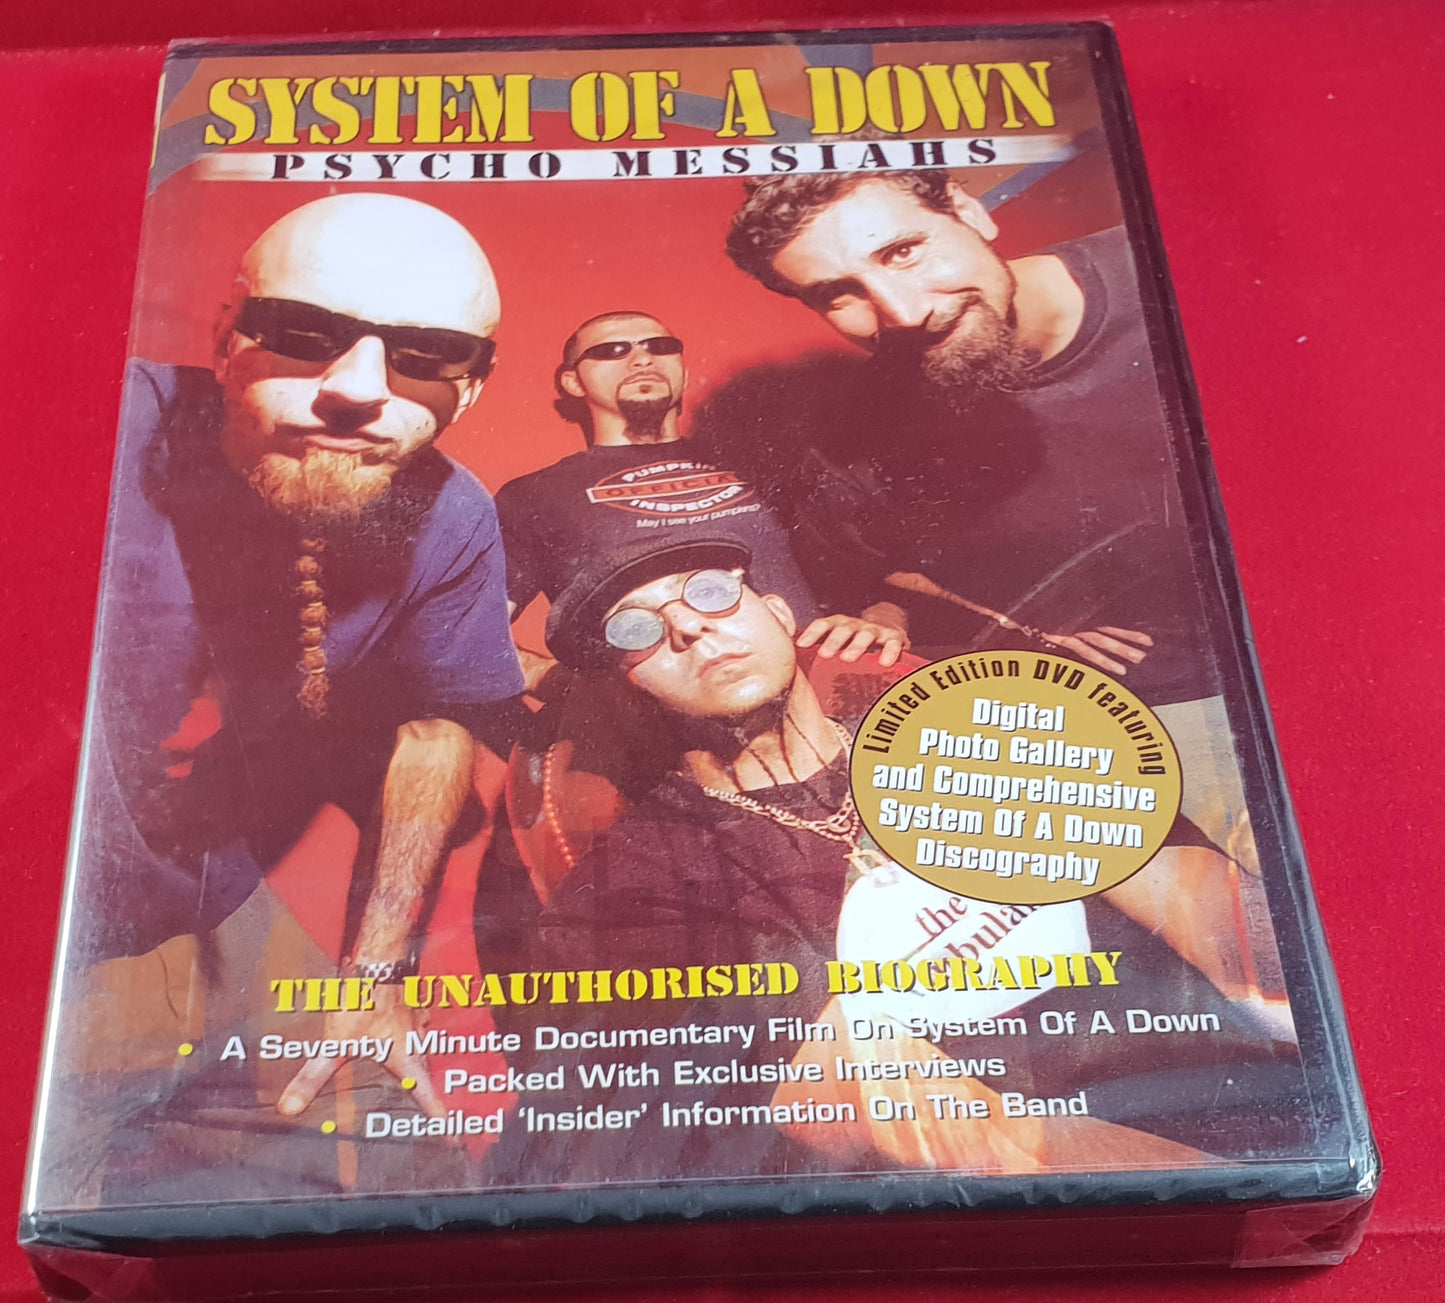 Brand New and Sealed System of a Down Psycho Messiahs DVD